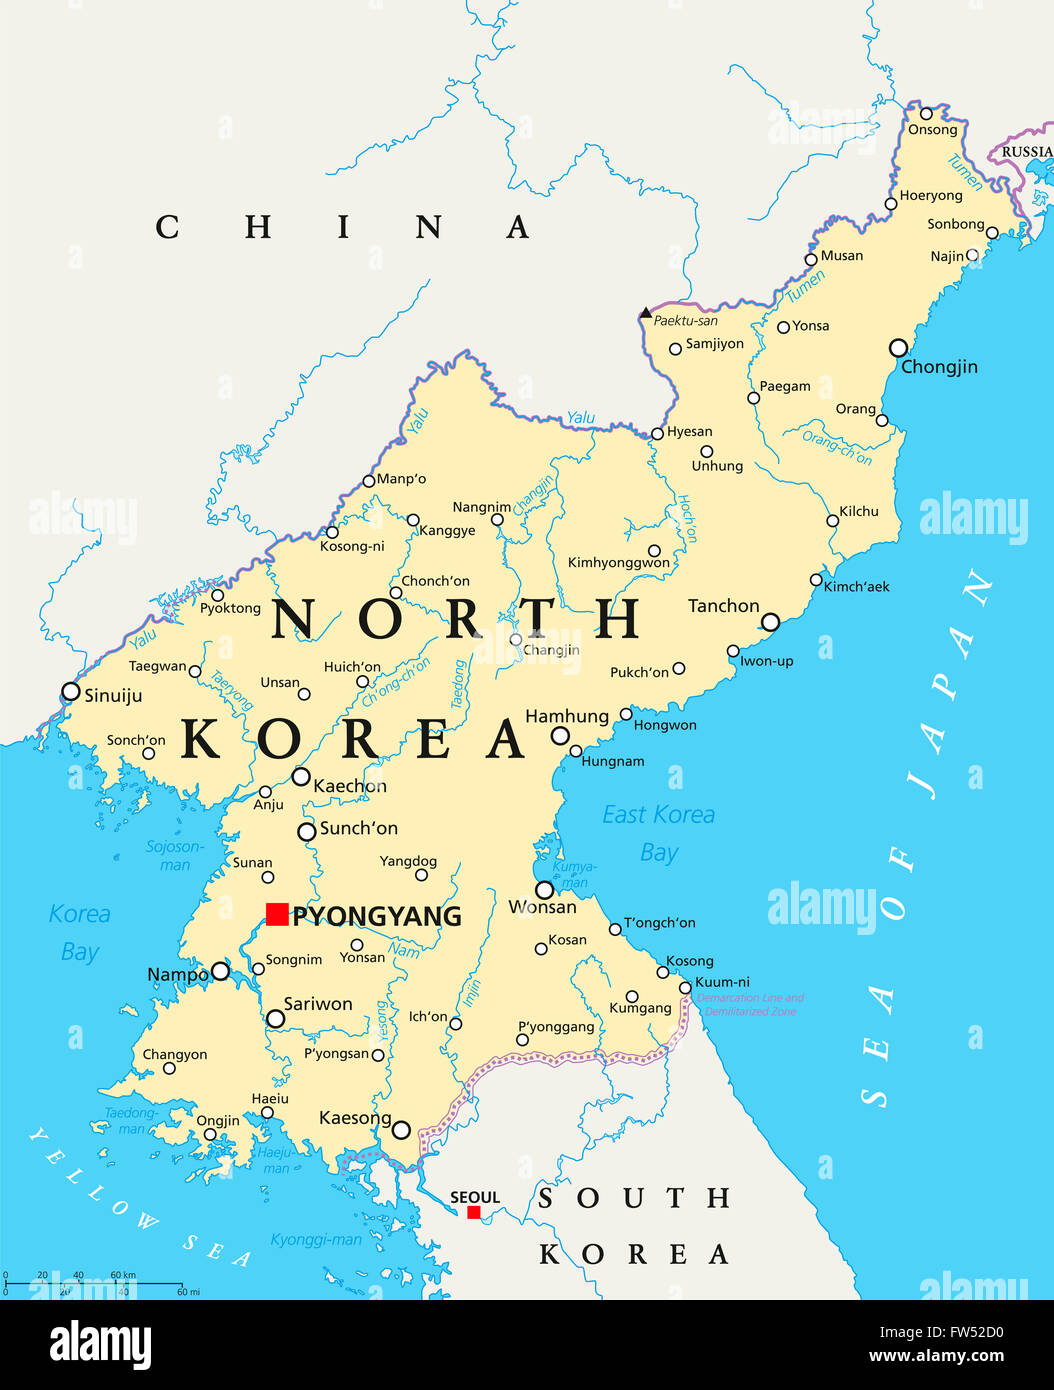 North Korea political map with capital Pyongyang, national borders, important cities, rivers and lakes. English labeling. Stock Photo